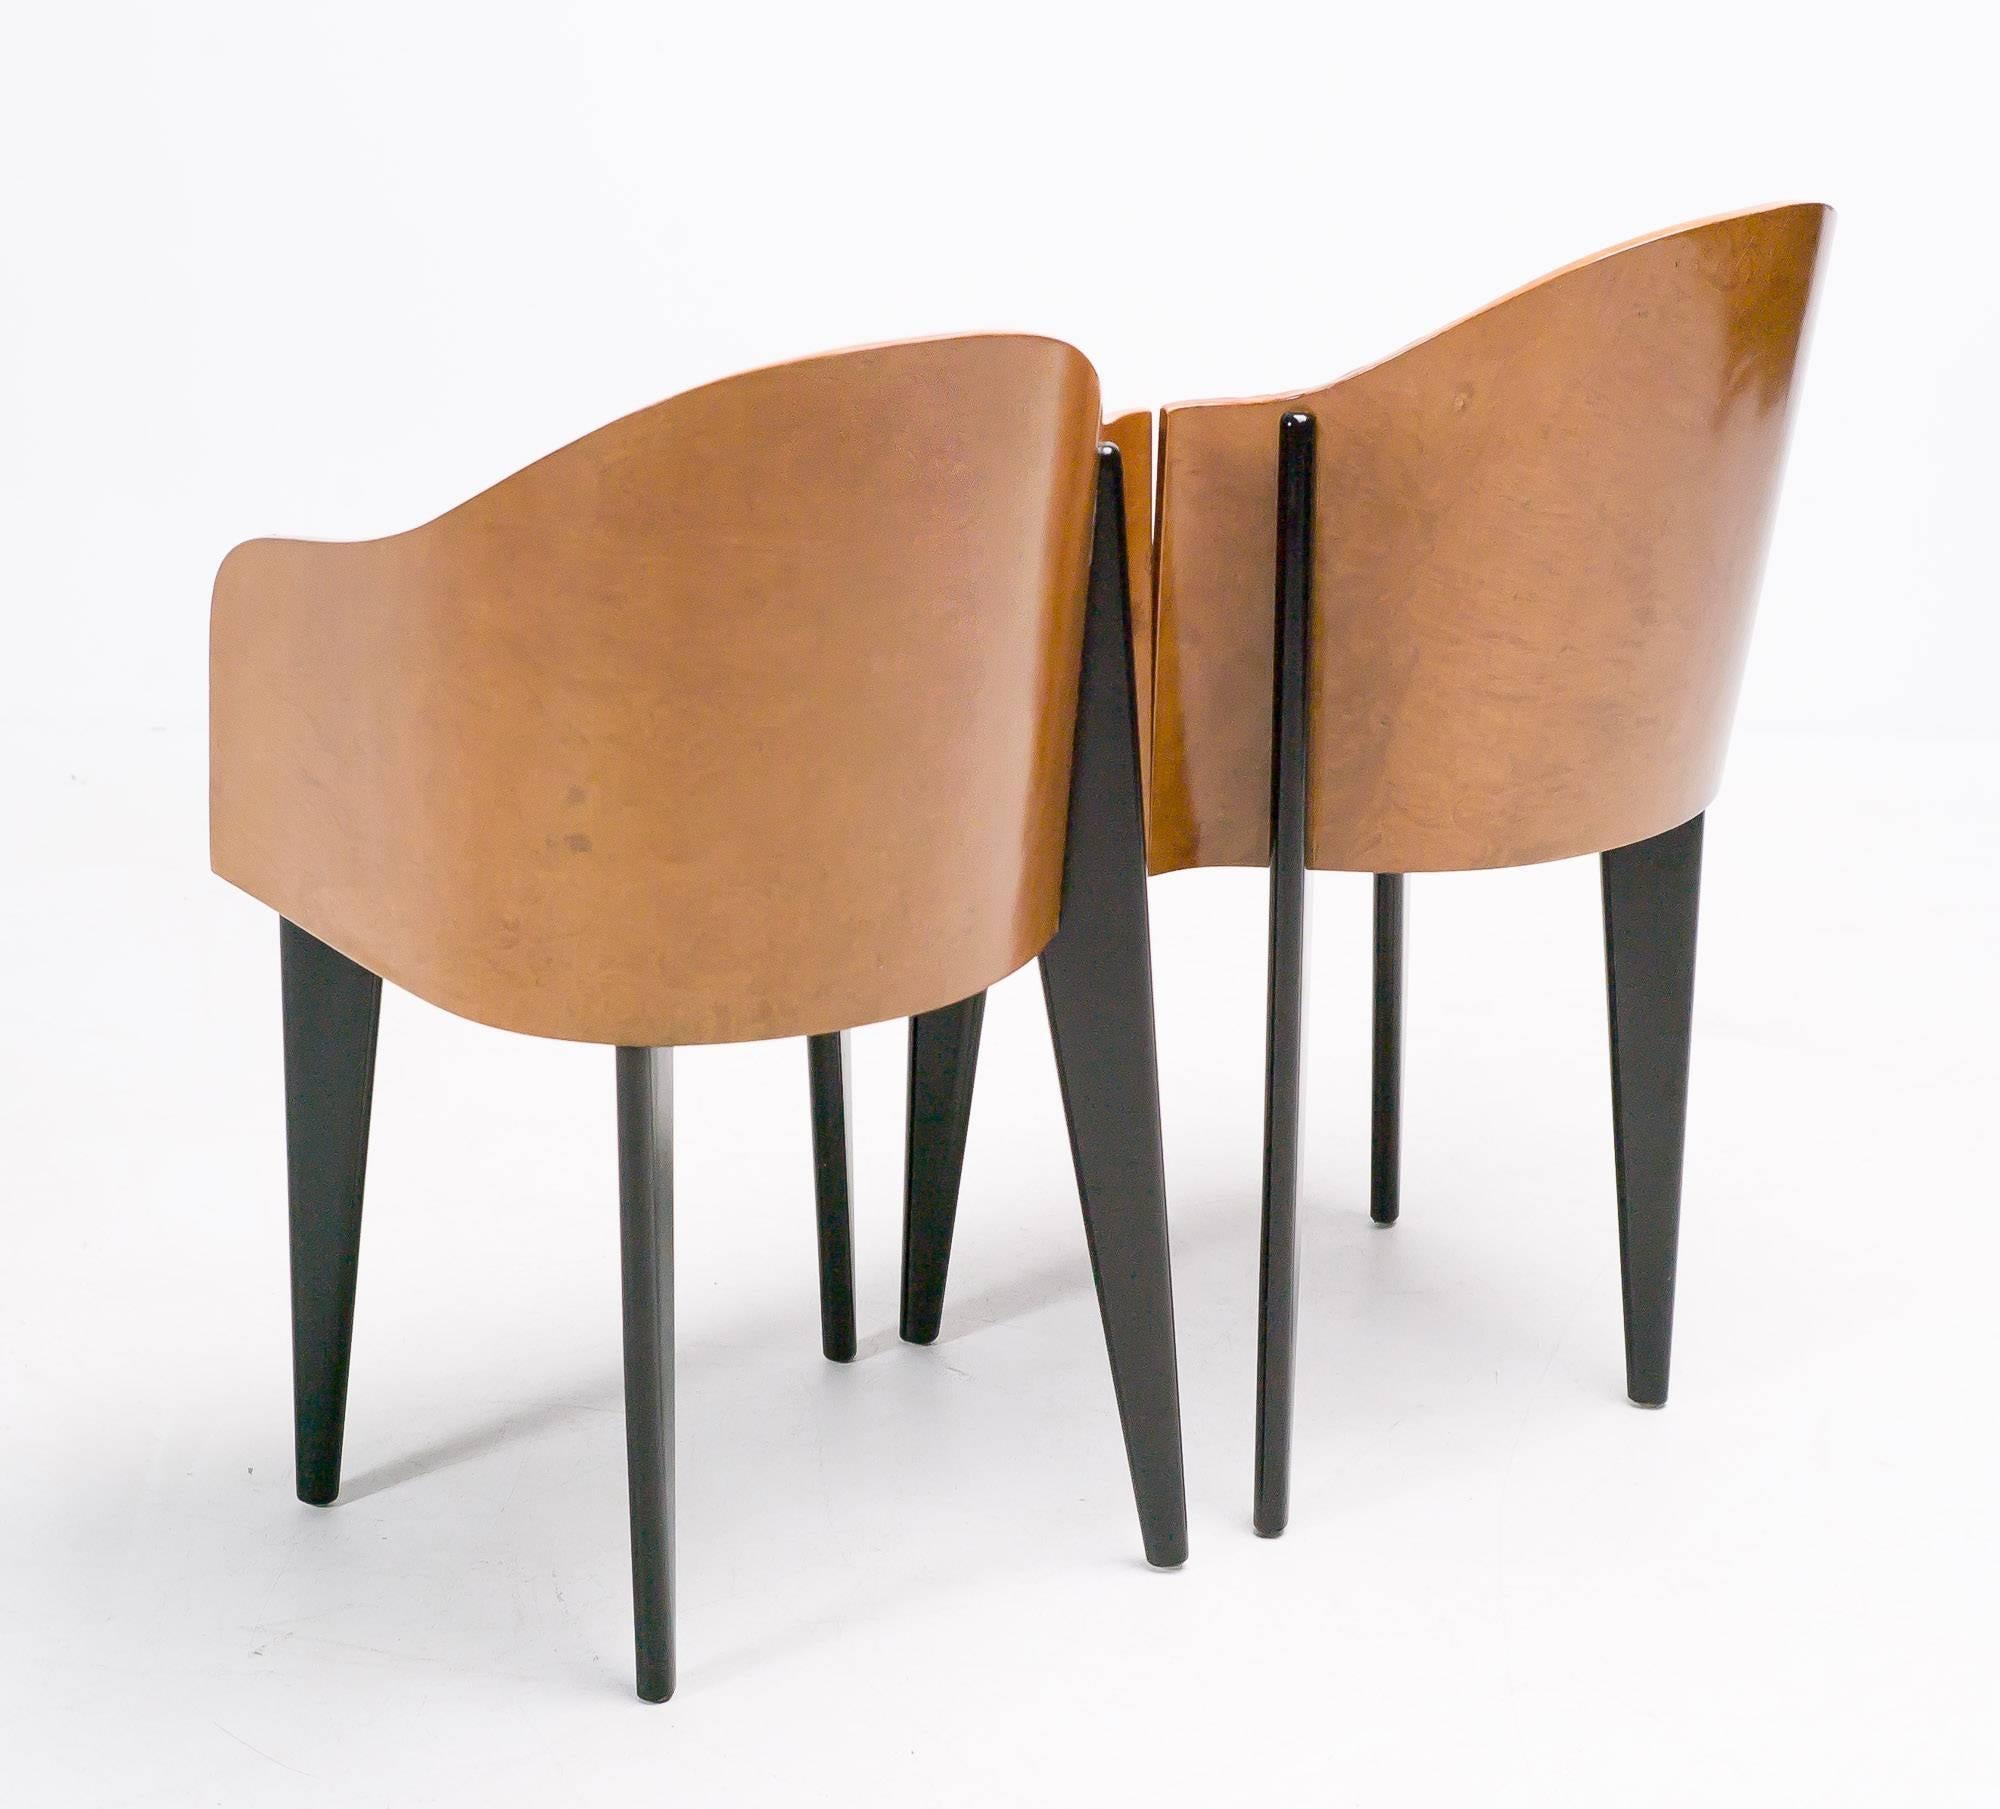 A wonderful pair of asymmetrical chairs by Saporiti.
Curved maple burl veneer back and black leather seat.
Toscana chairs. Piero Sartogo 1986.
 